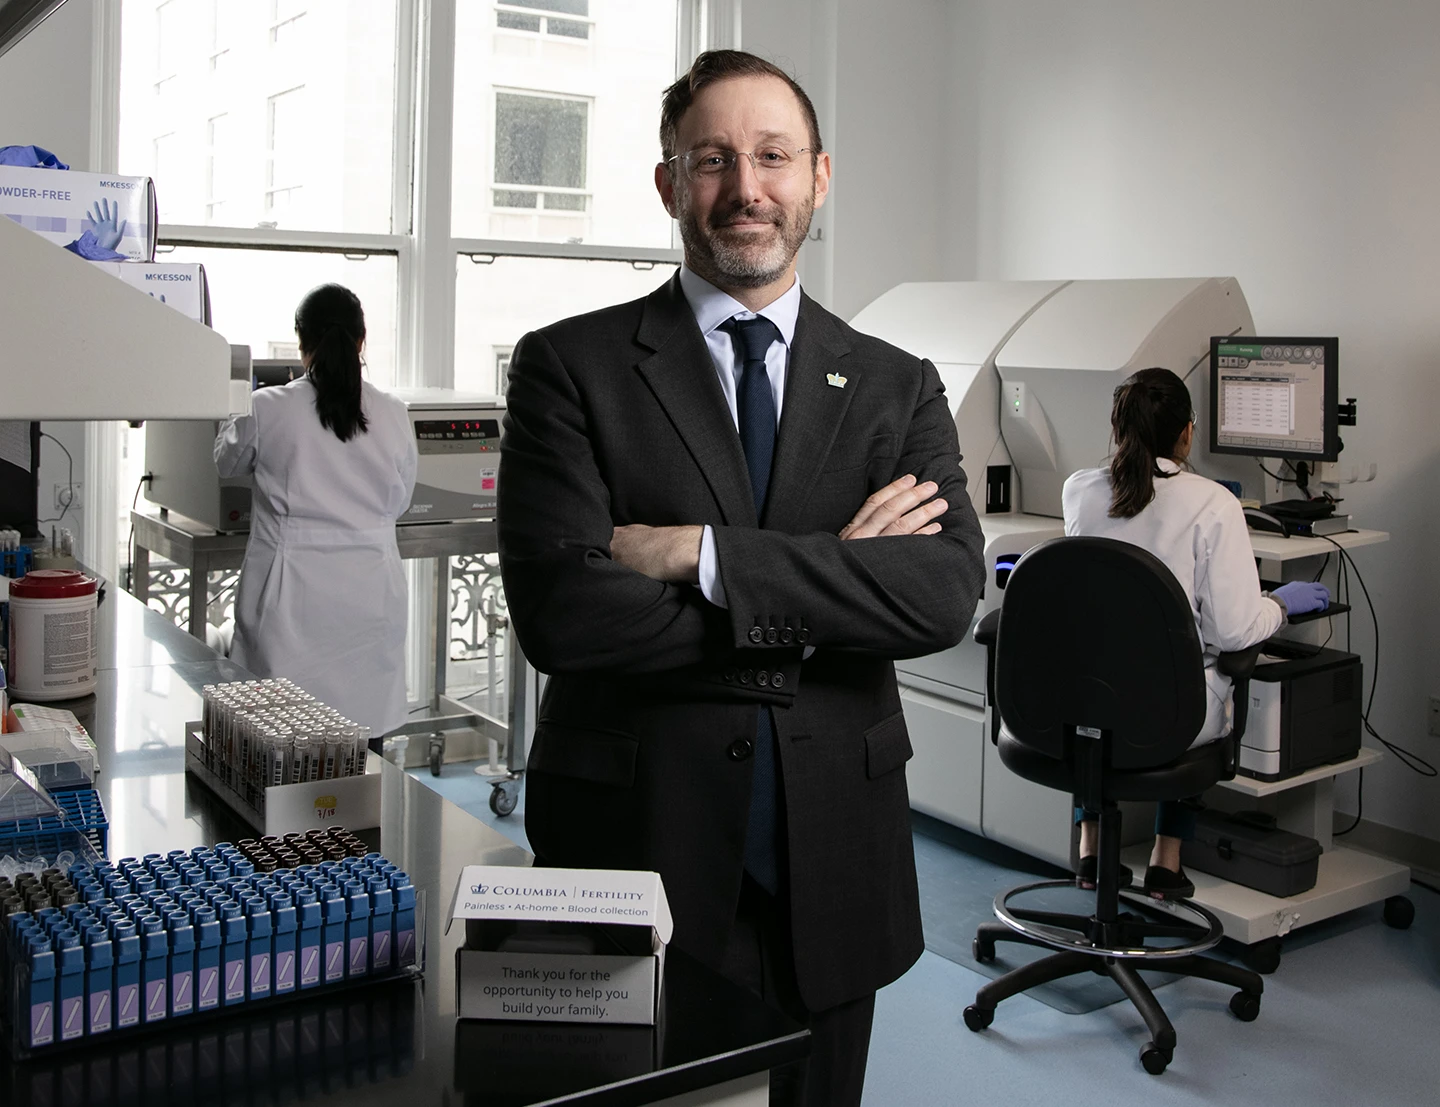 Zev Williams, MD, PhD, Director of the Columbia University Fertility Center, in the fertility research laboratory with colleagues